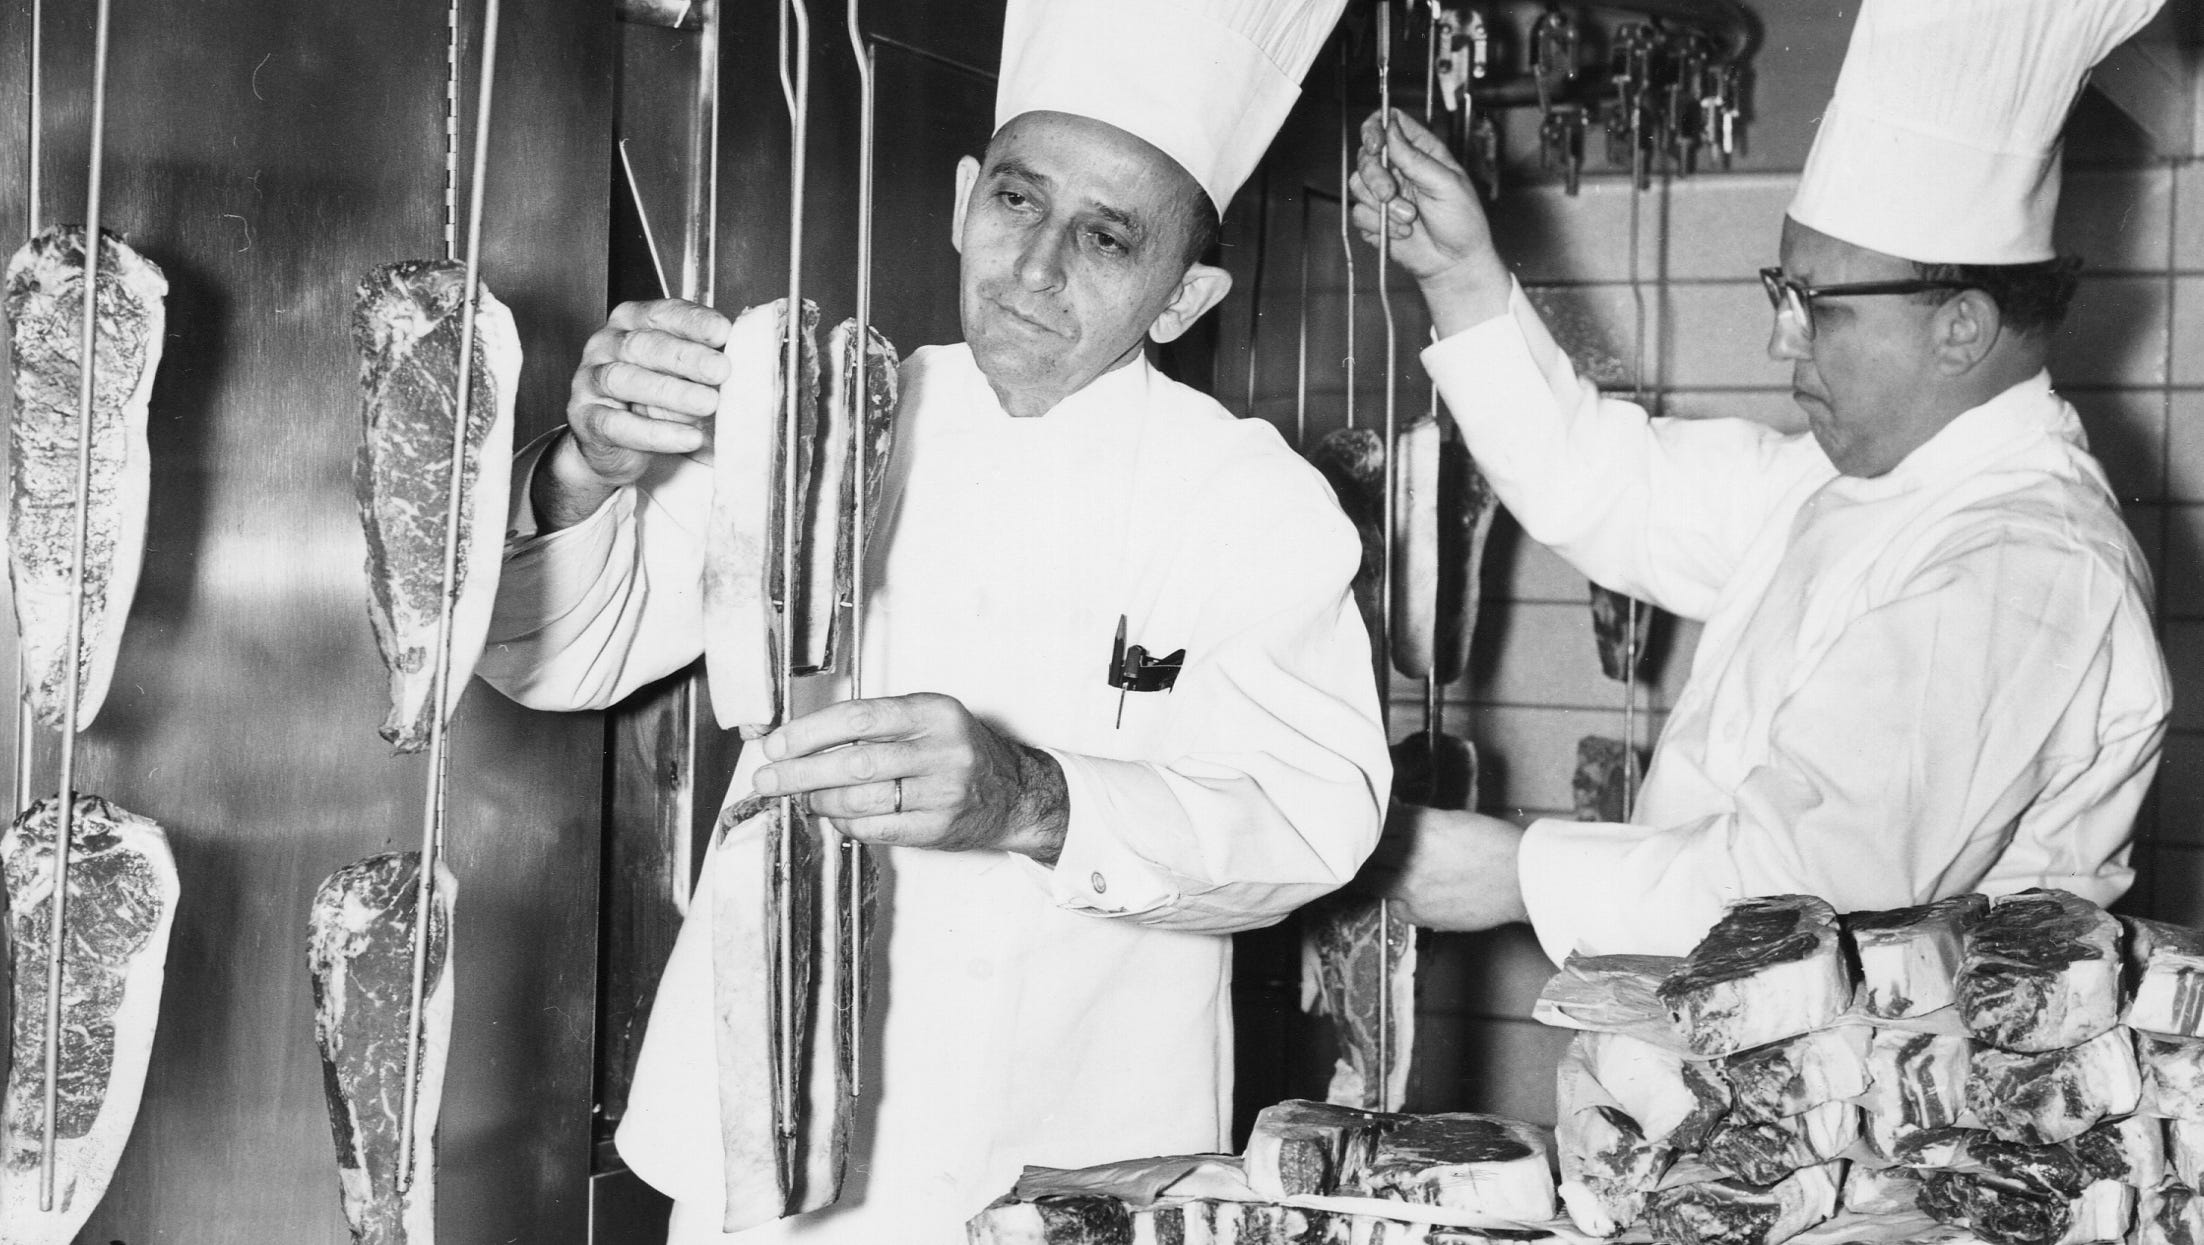 Cobo has been home to many exhibits and expositions; here, butchers display their trade on Oct. 21, 1960.